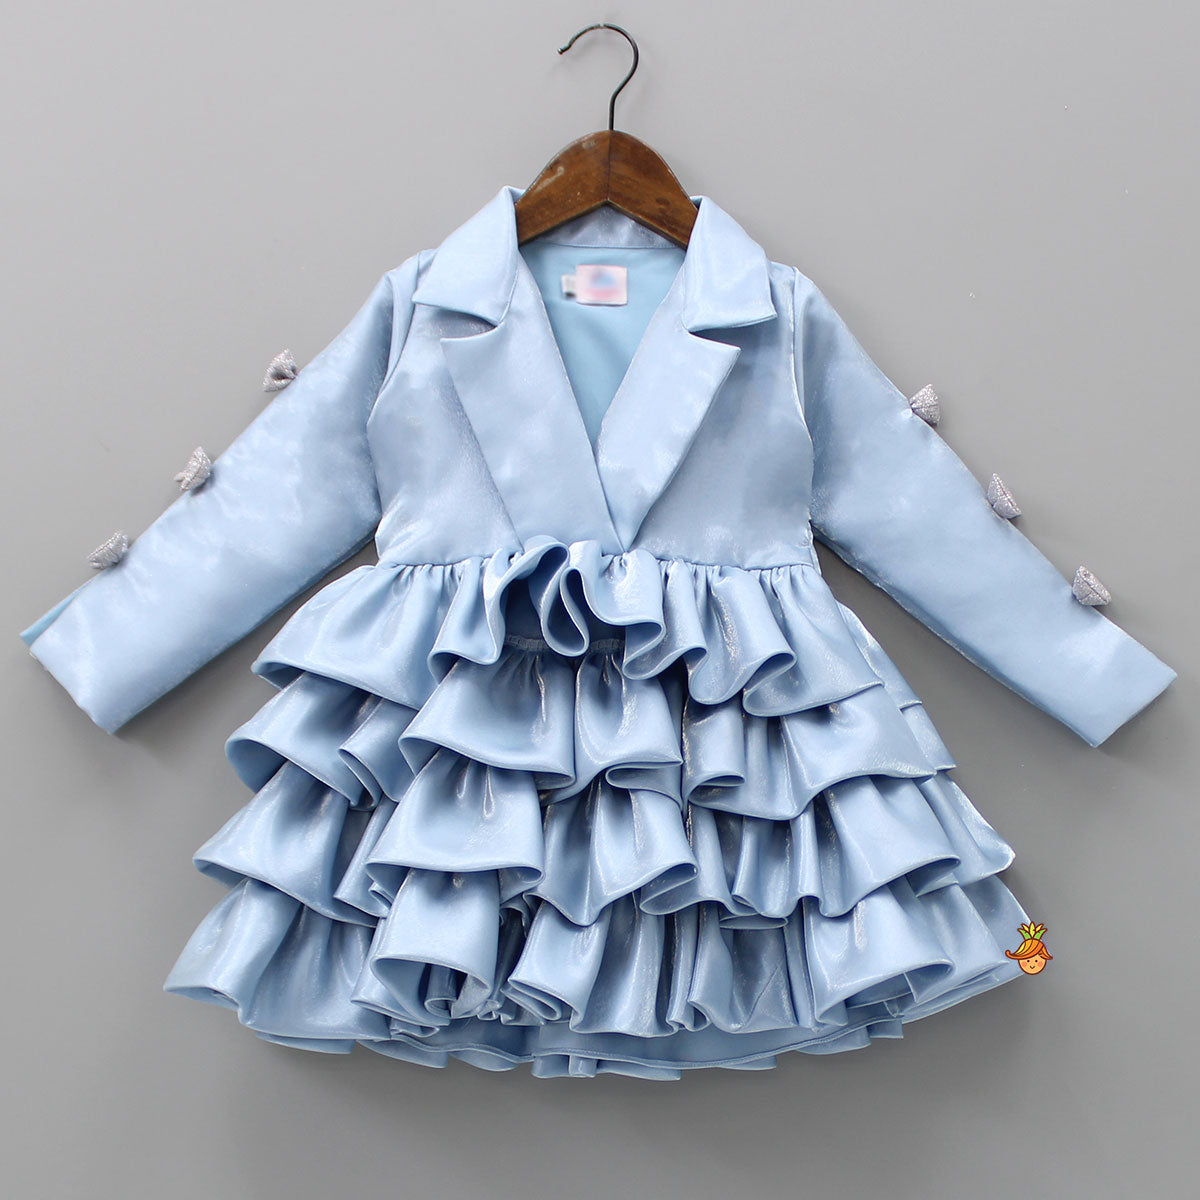 Pre Order: Gorgeous Collared Neck Layered Ruffled Dress